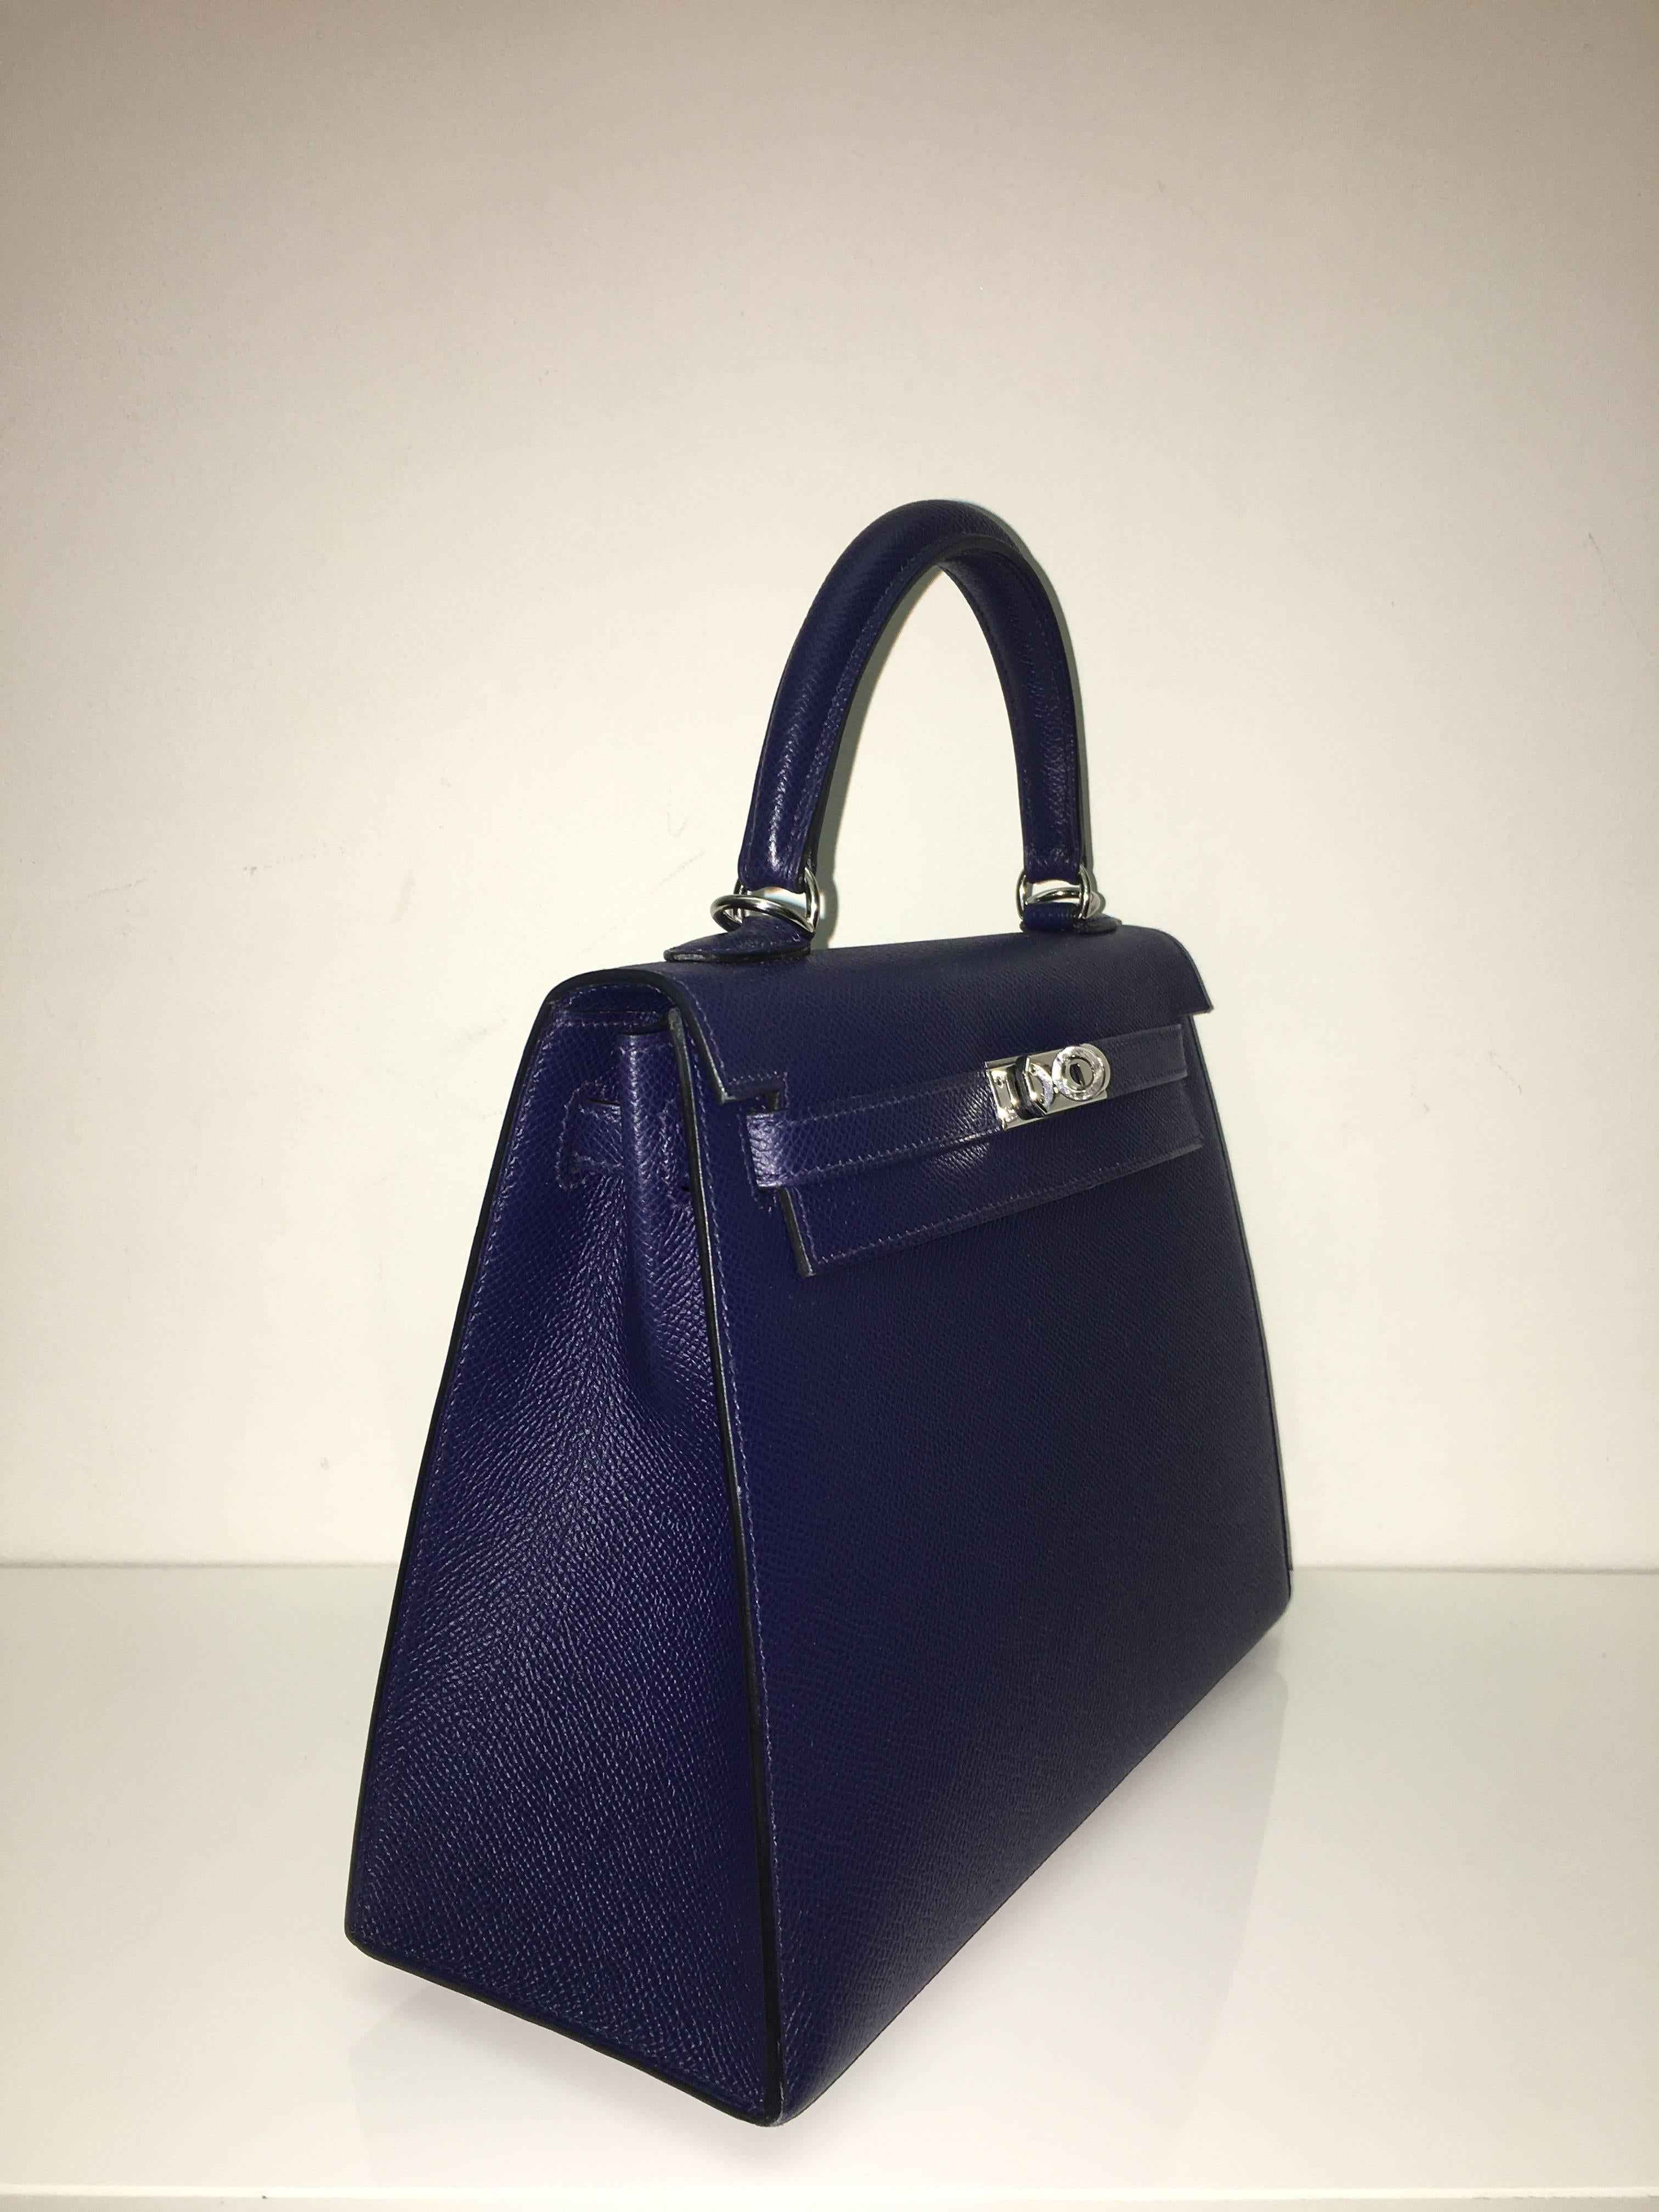 Hermes 
Kelly Size 25
Epsom Leather 
Colour Blue Sapphire
Silver (palladium) Hardware 
store fresh, comes with receipt and full set (dust bag, box...) 
Hydeparkfashion specializes in sourcing and delivering authentic luxury handbags, mainly